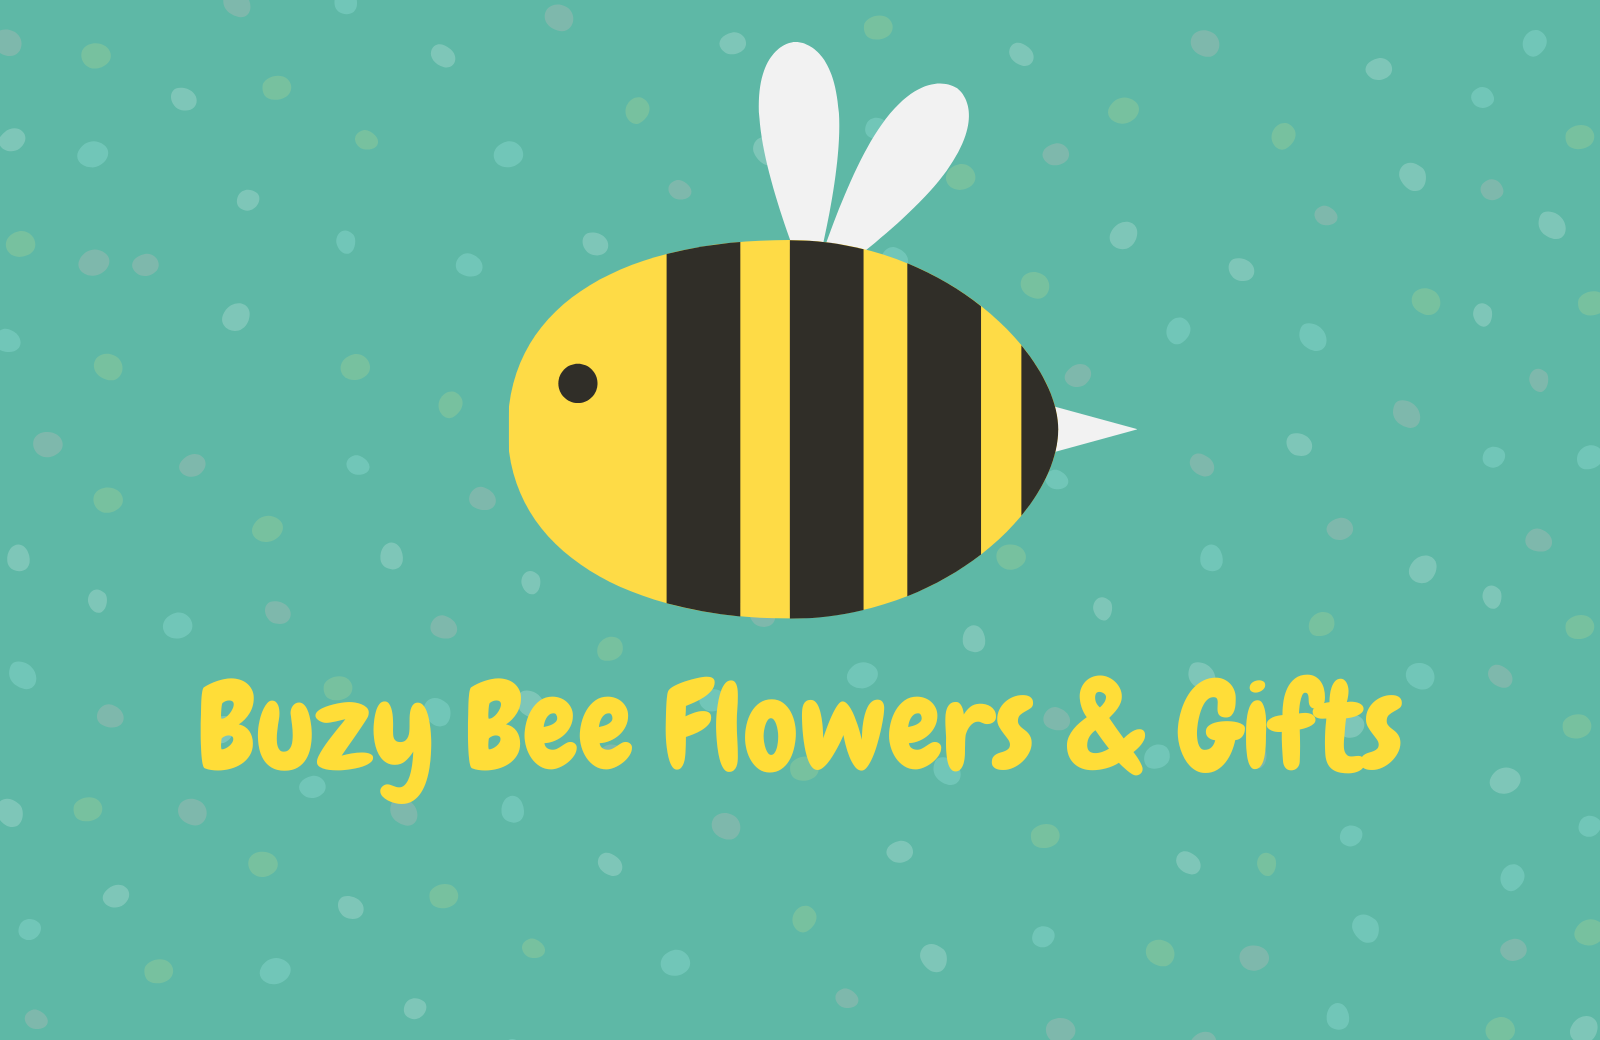 Buzy Bee Flowers And Gifts 1410 W Commercial St, Ozark Arkansas 72949